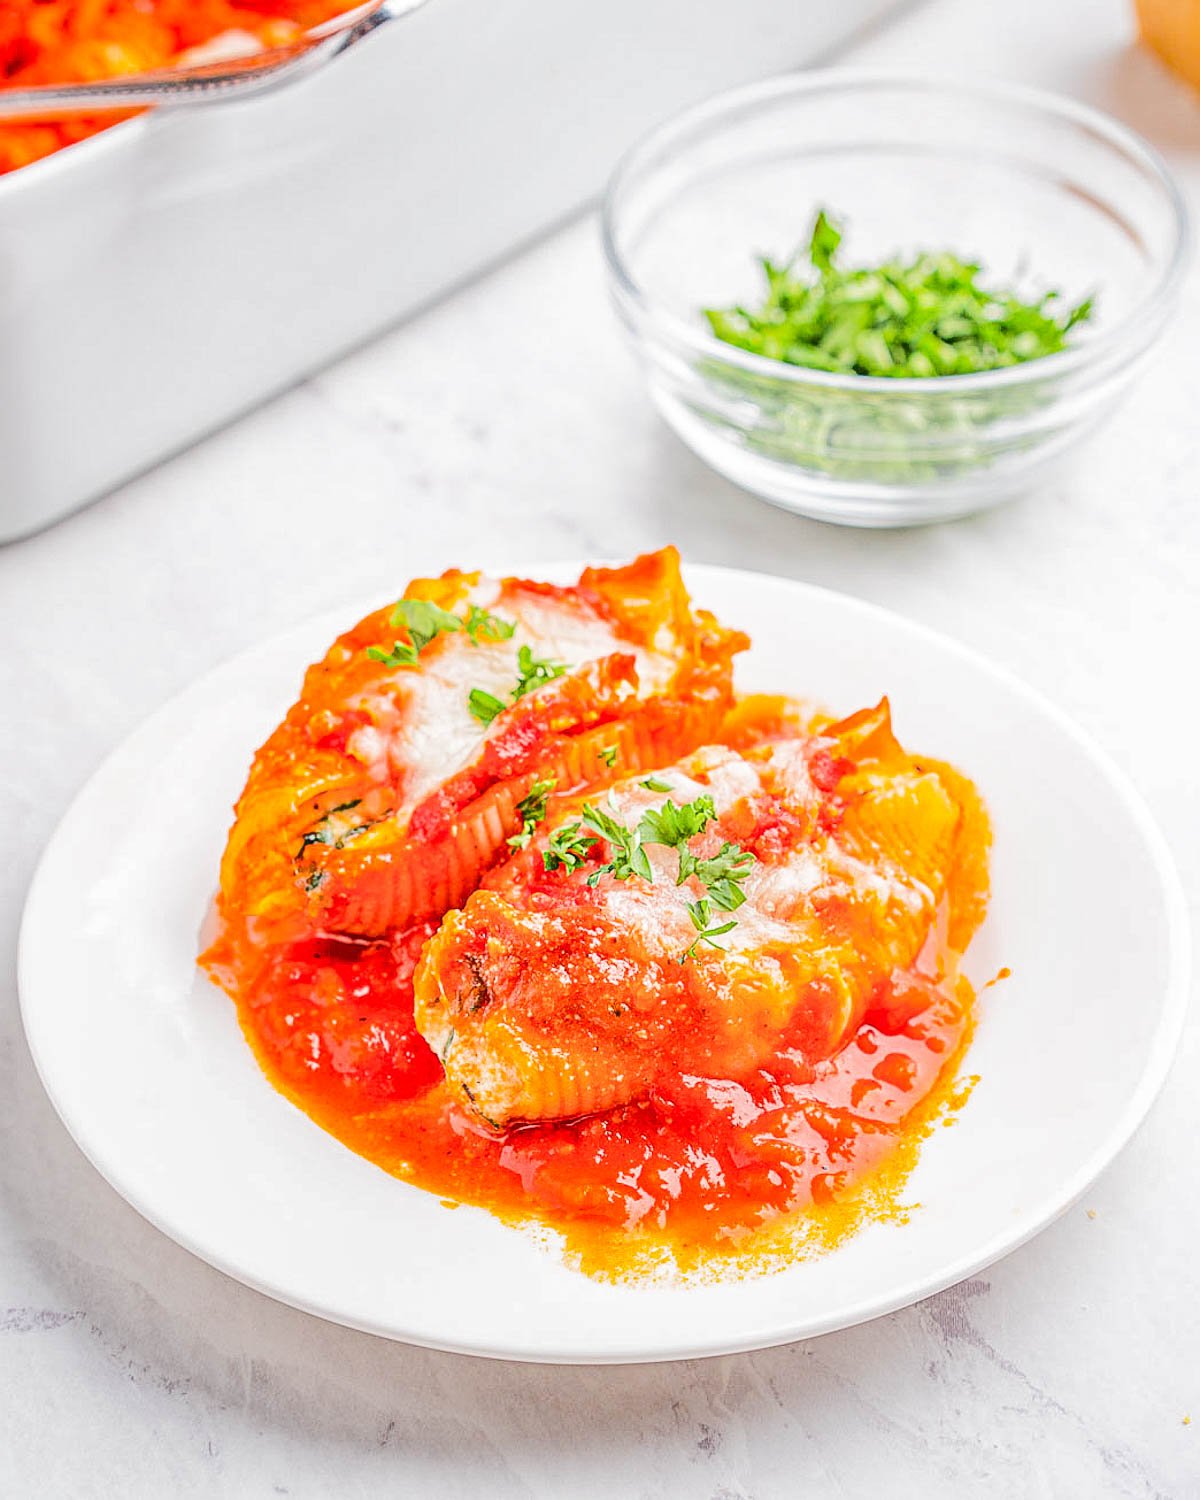 A plate of stuffed shells garnished with herbs in a tomato sauce.